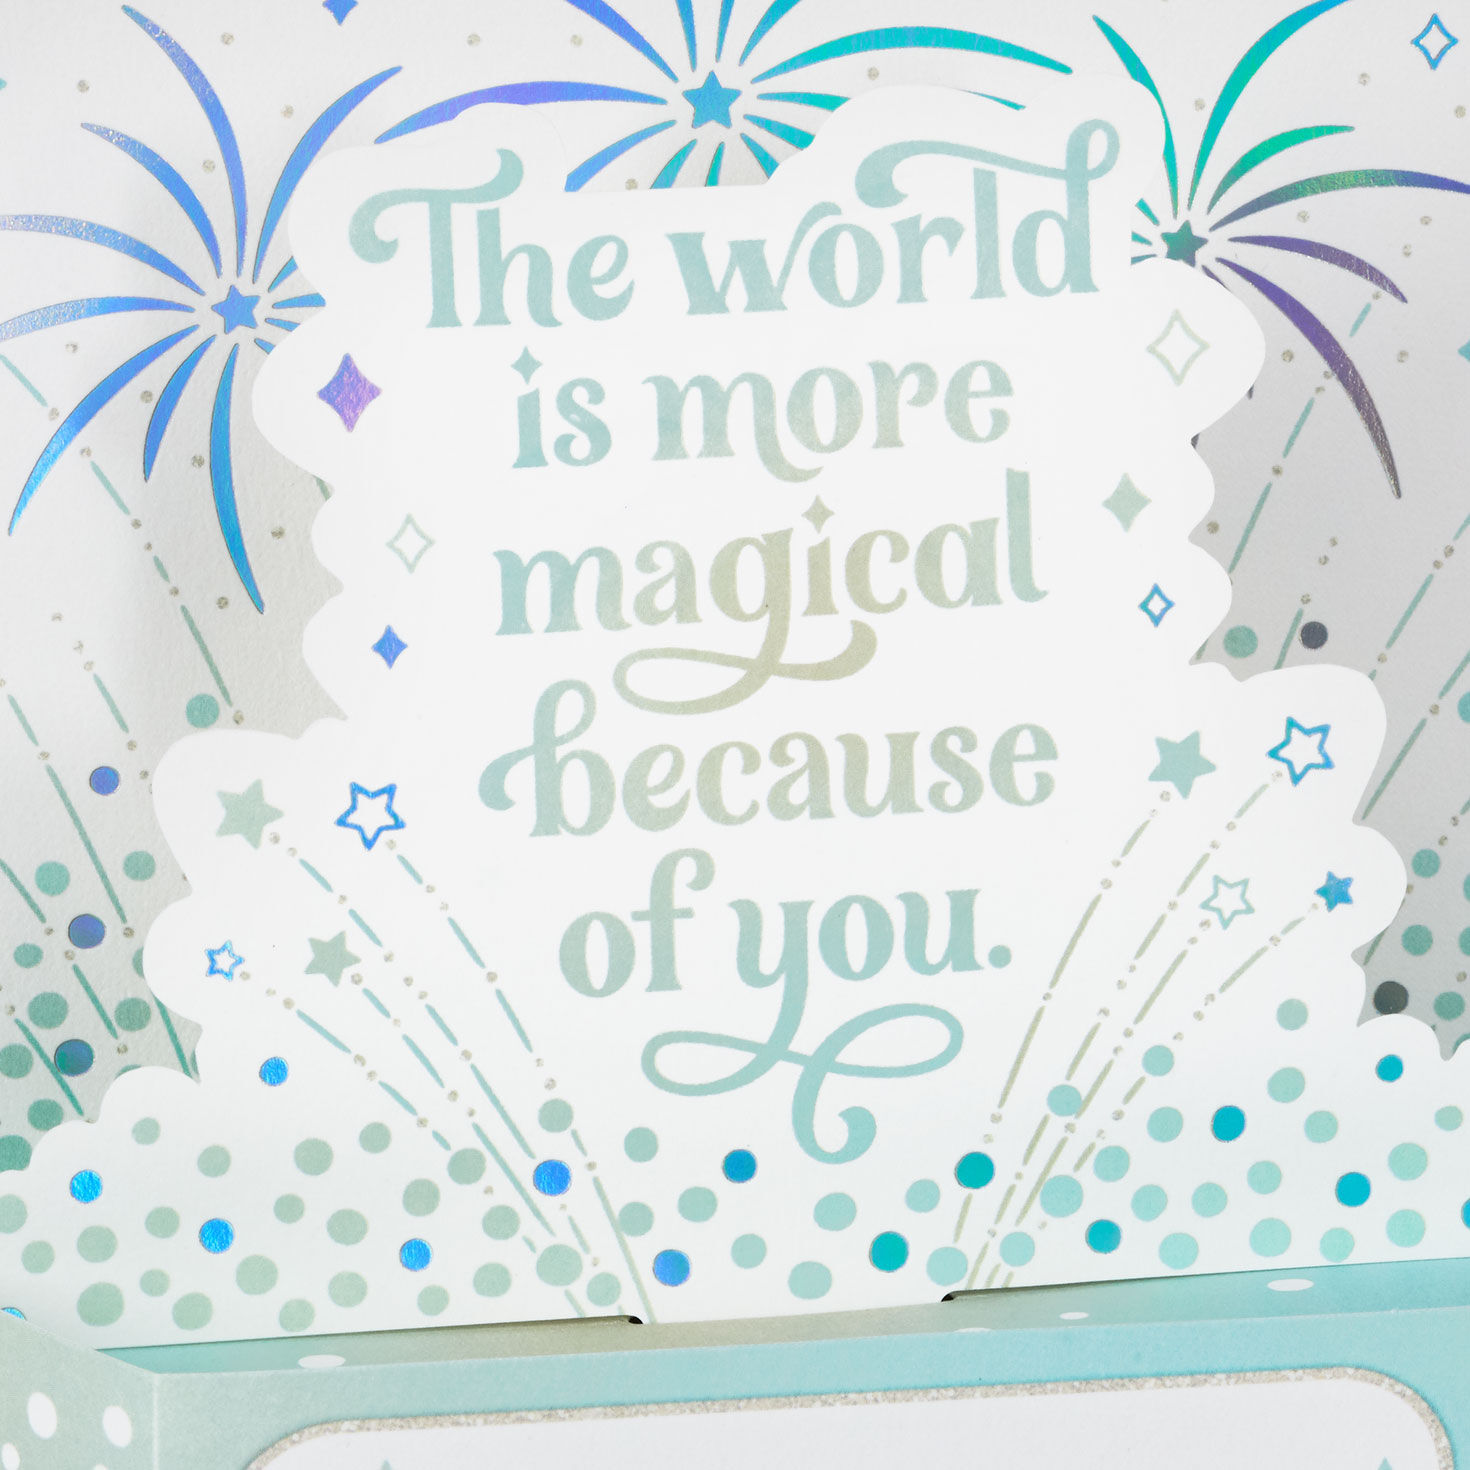 Disney 100 Years of Wonder You're Magical Musical 3D Pop-Up Card With Light for only USD 9.99 | Hallmark